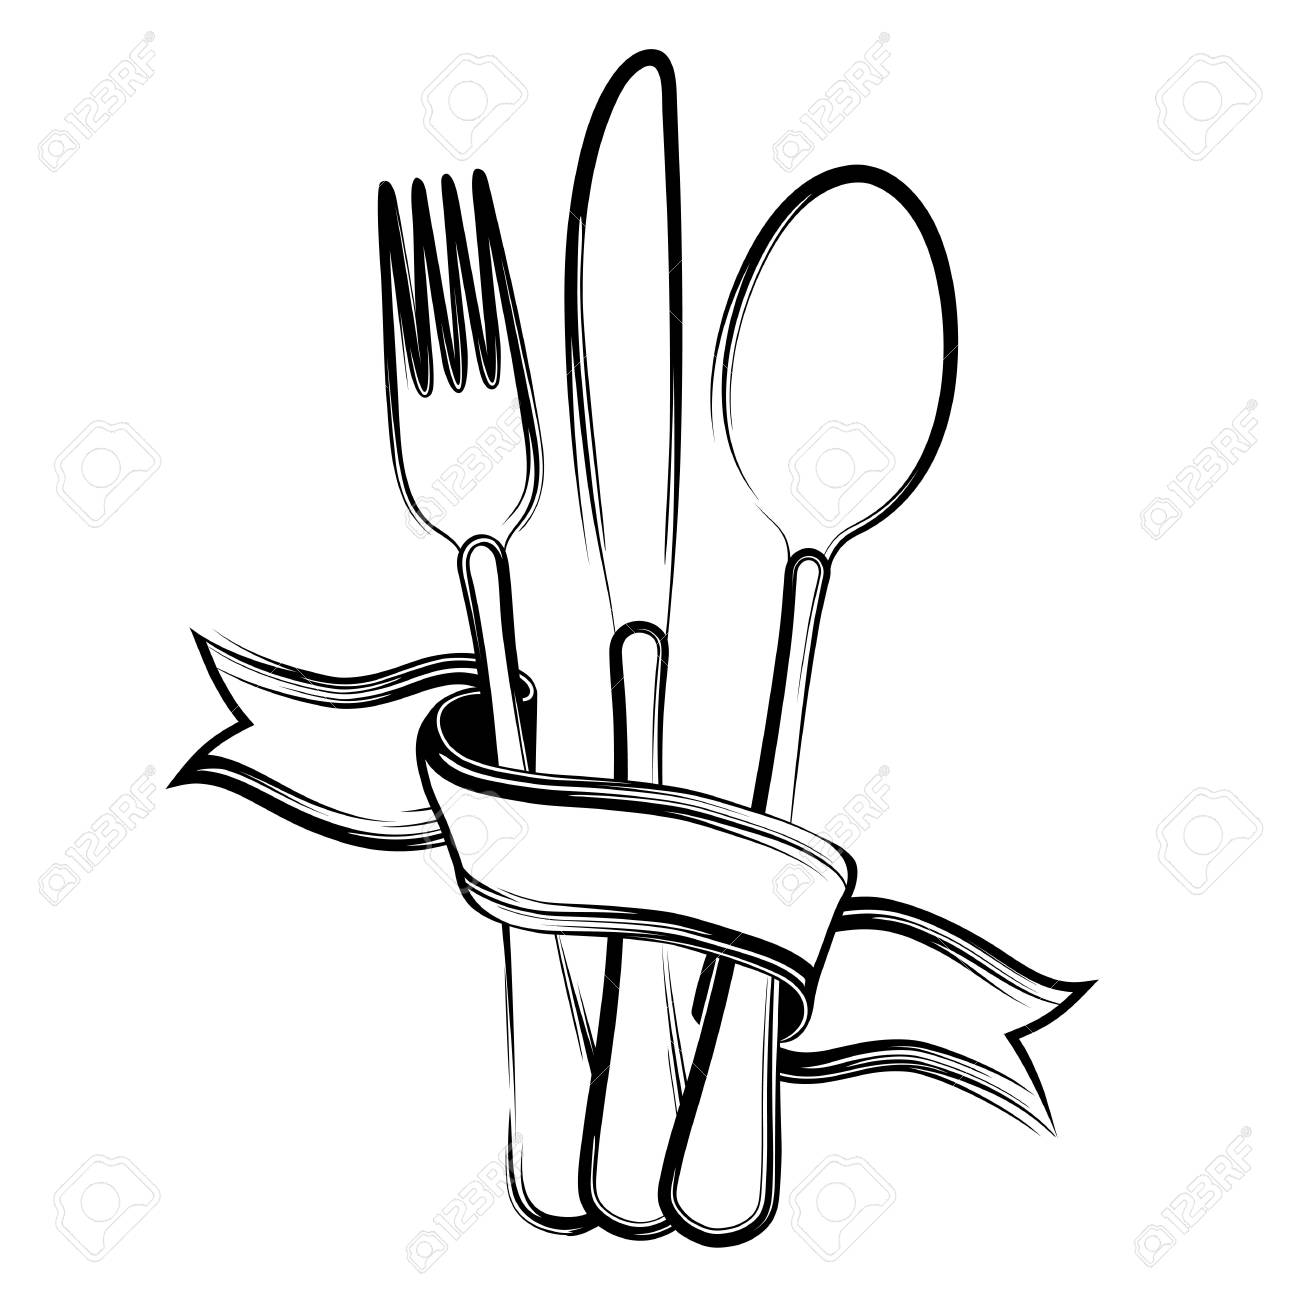 Ribbon Spoon Knife And Fork On A White Background Black